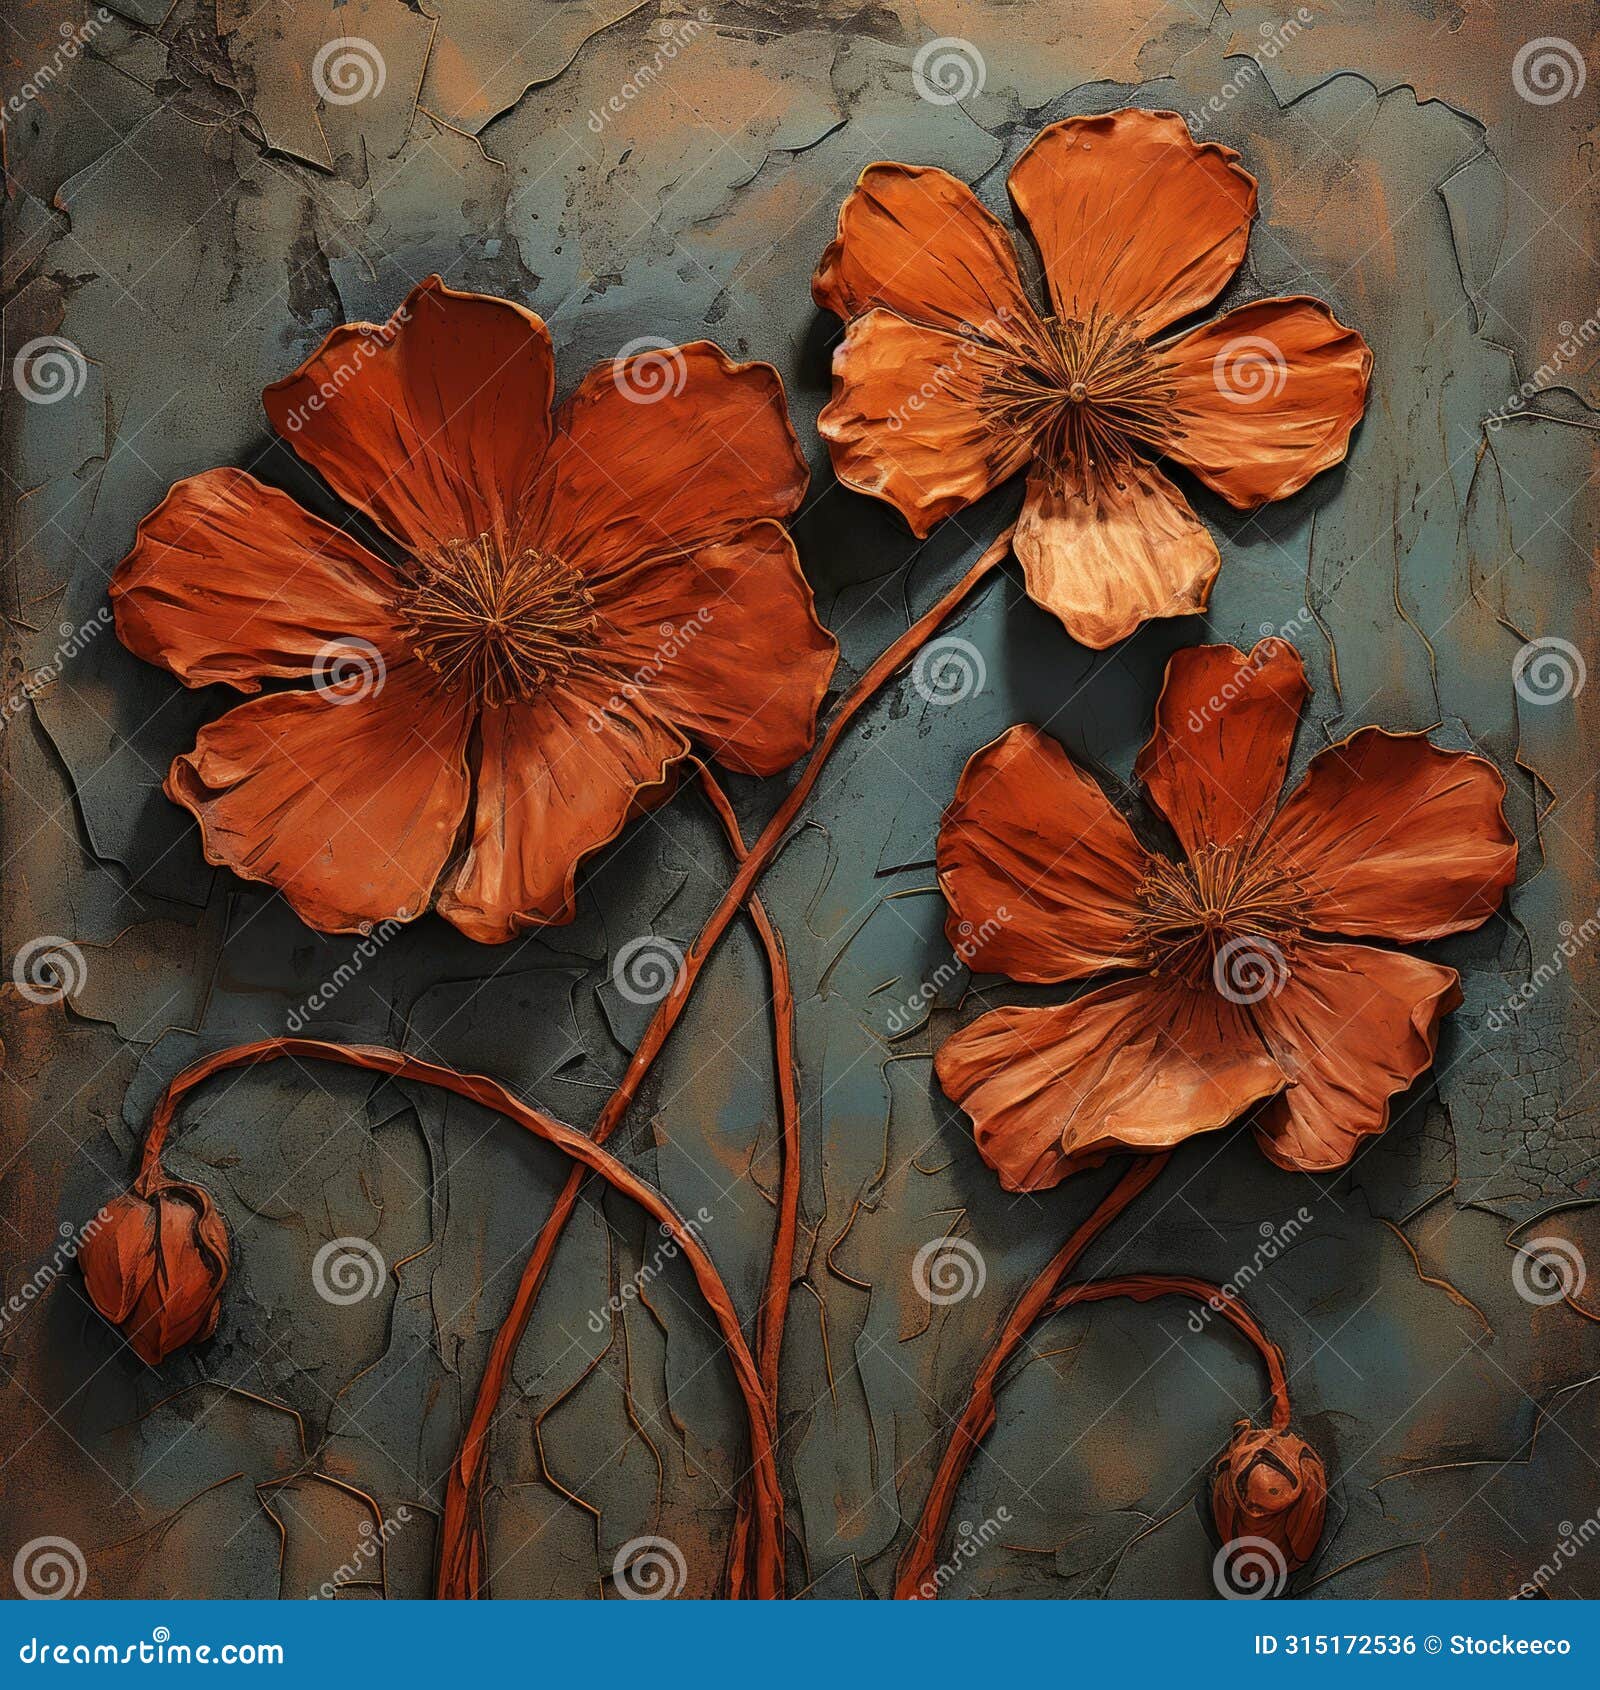 copper leaf oil painting of orange flowers on rocks - peter gric style